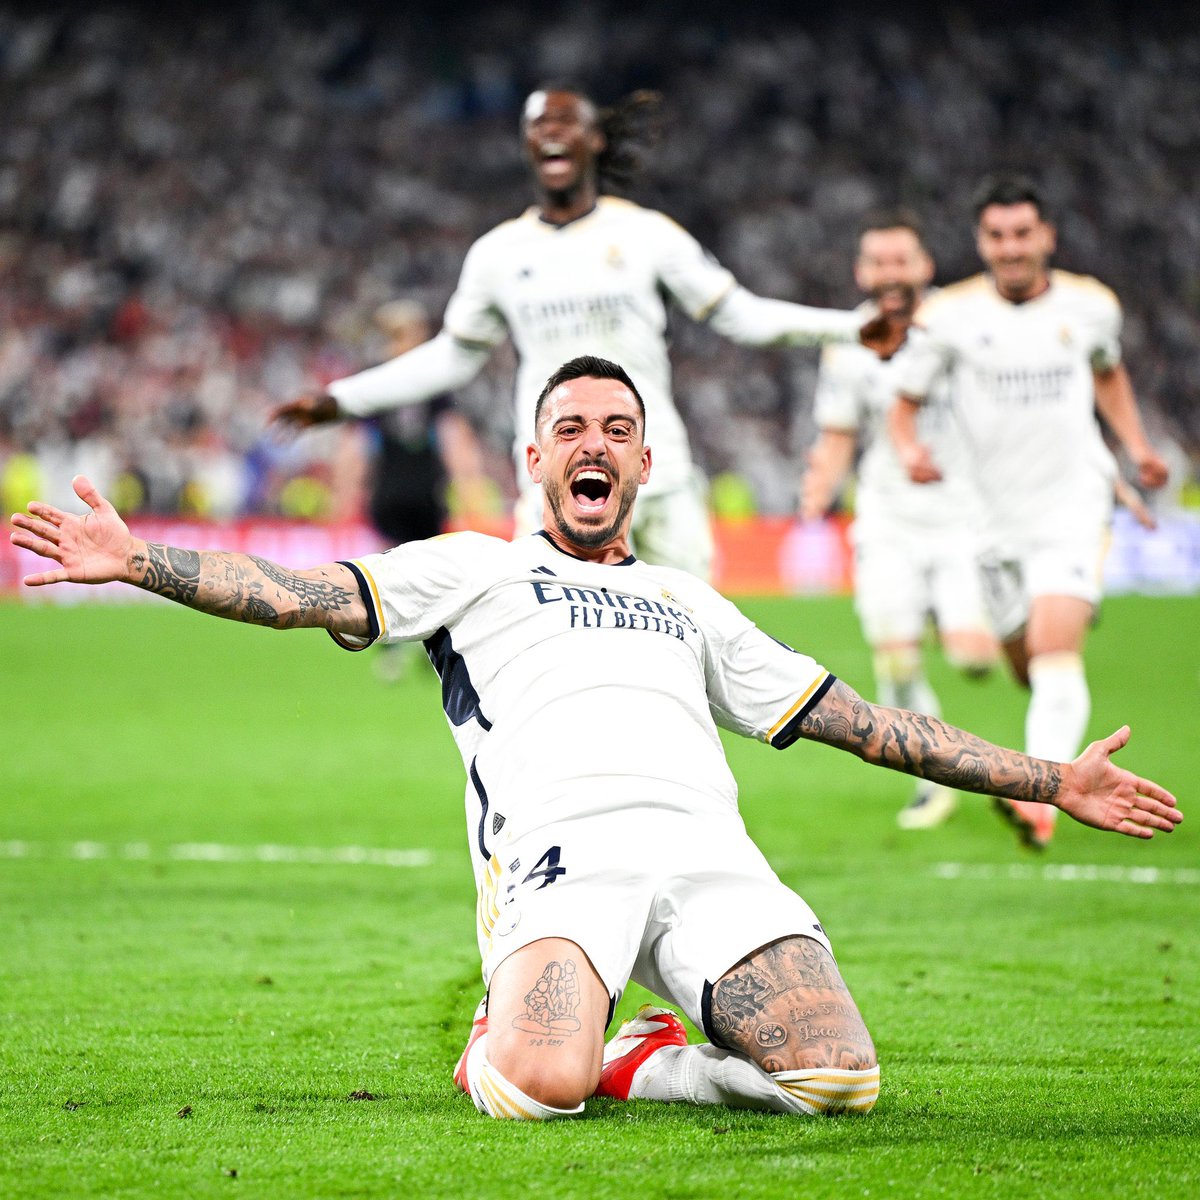 Sometime in 2022. Just one more moment like this in Wembley and Real Madrid will be lifting their 15th UCL trophy . 😳🤲🏻